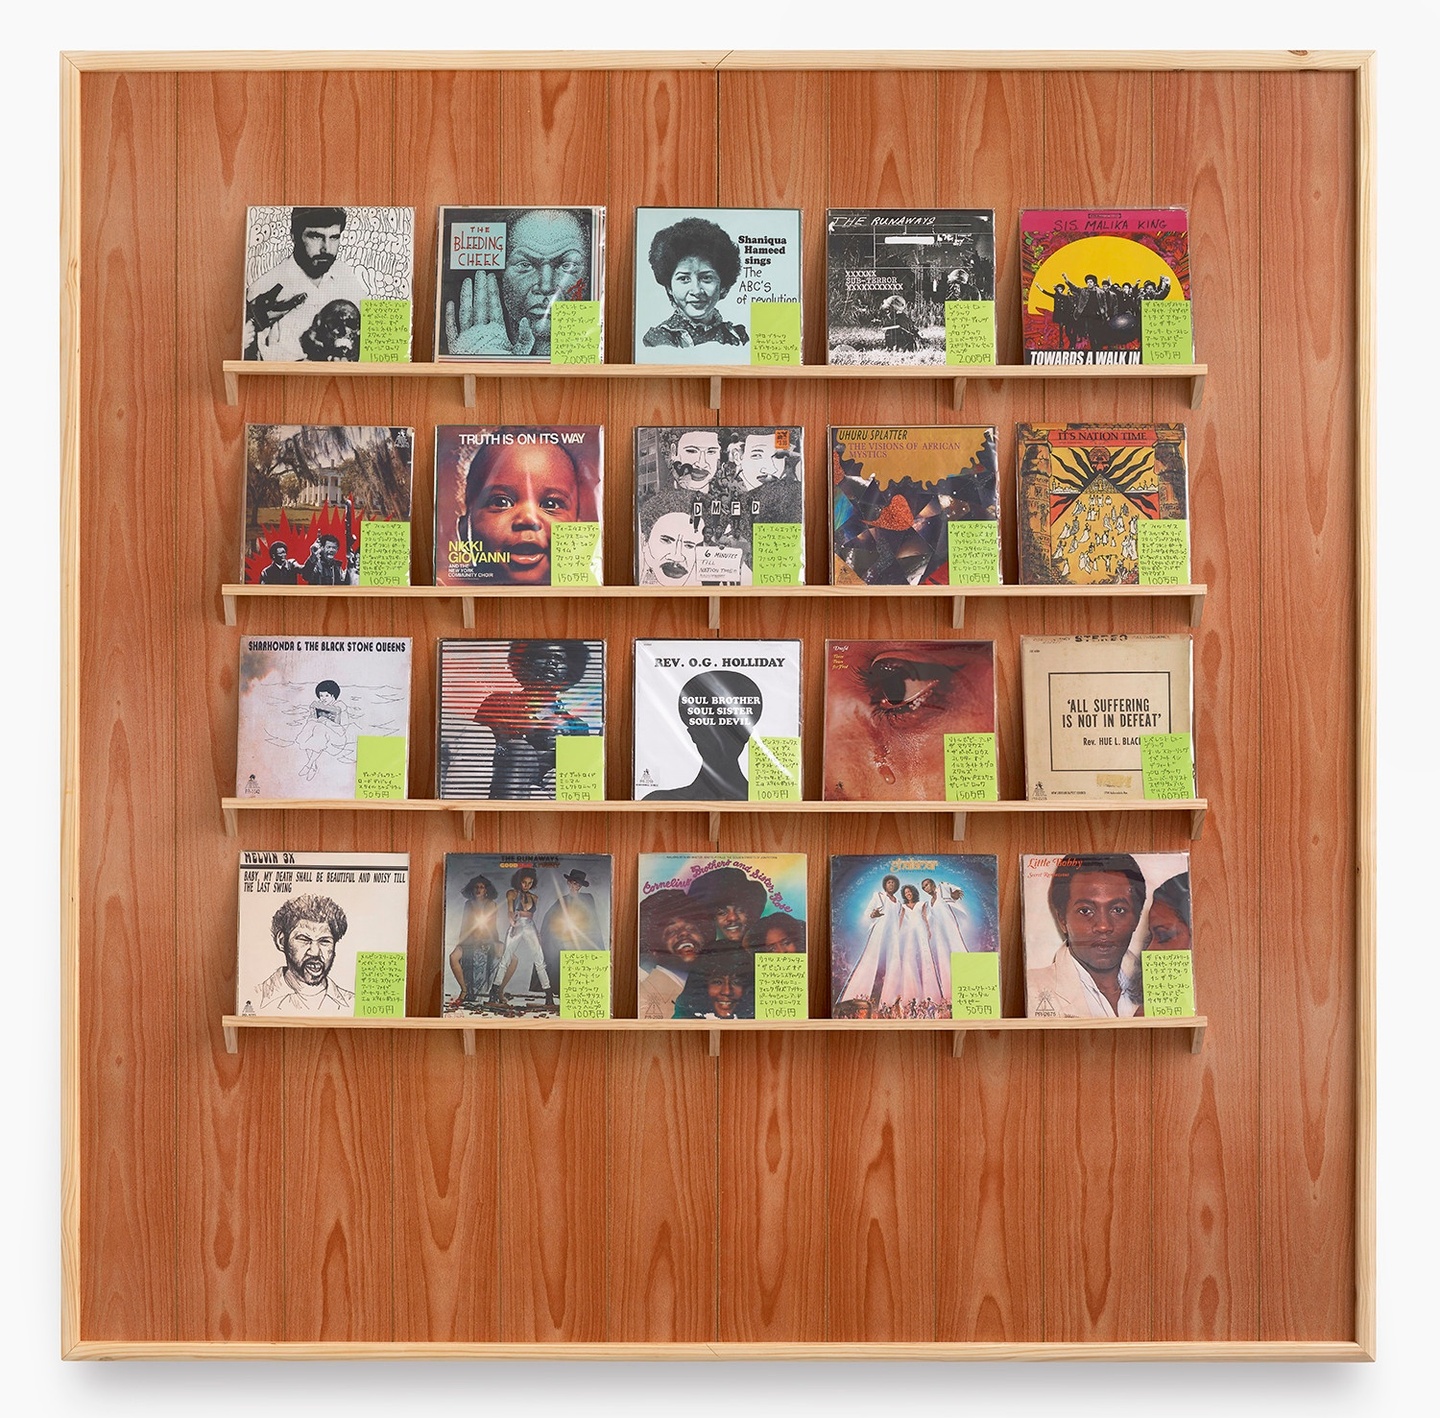 Collage on paper, wood paneling, wood shelving, plastic bags, featuring five rows of four record covers.